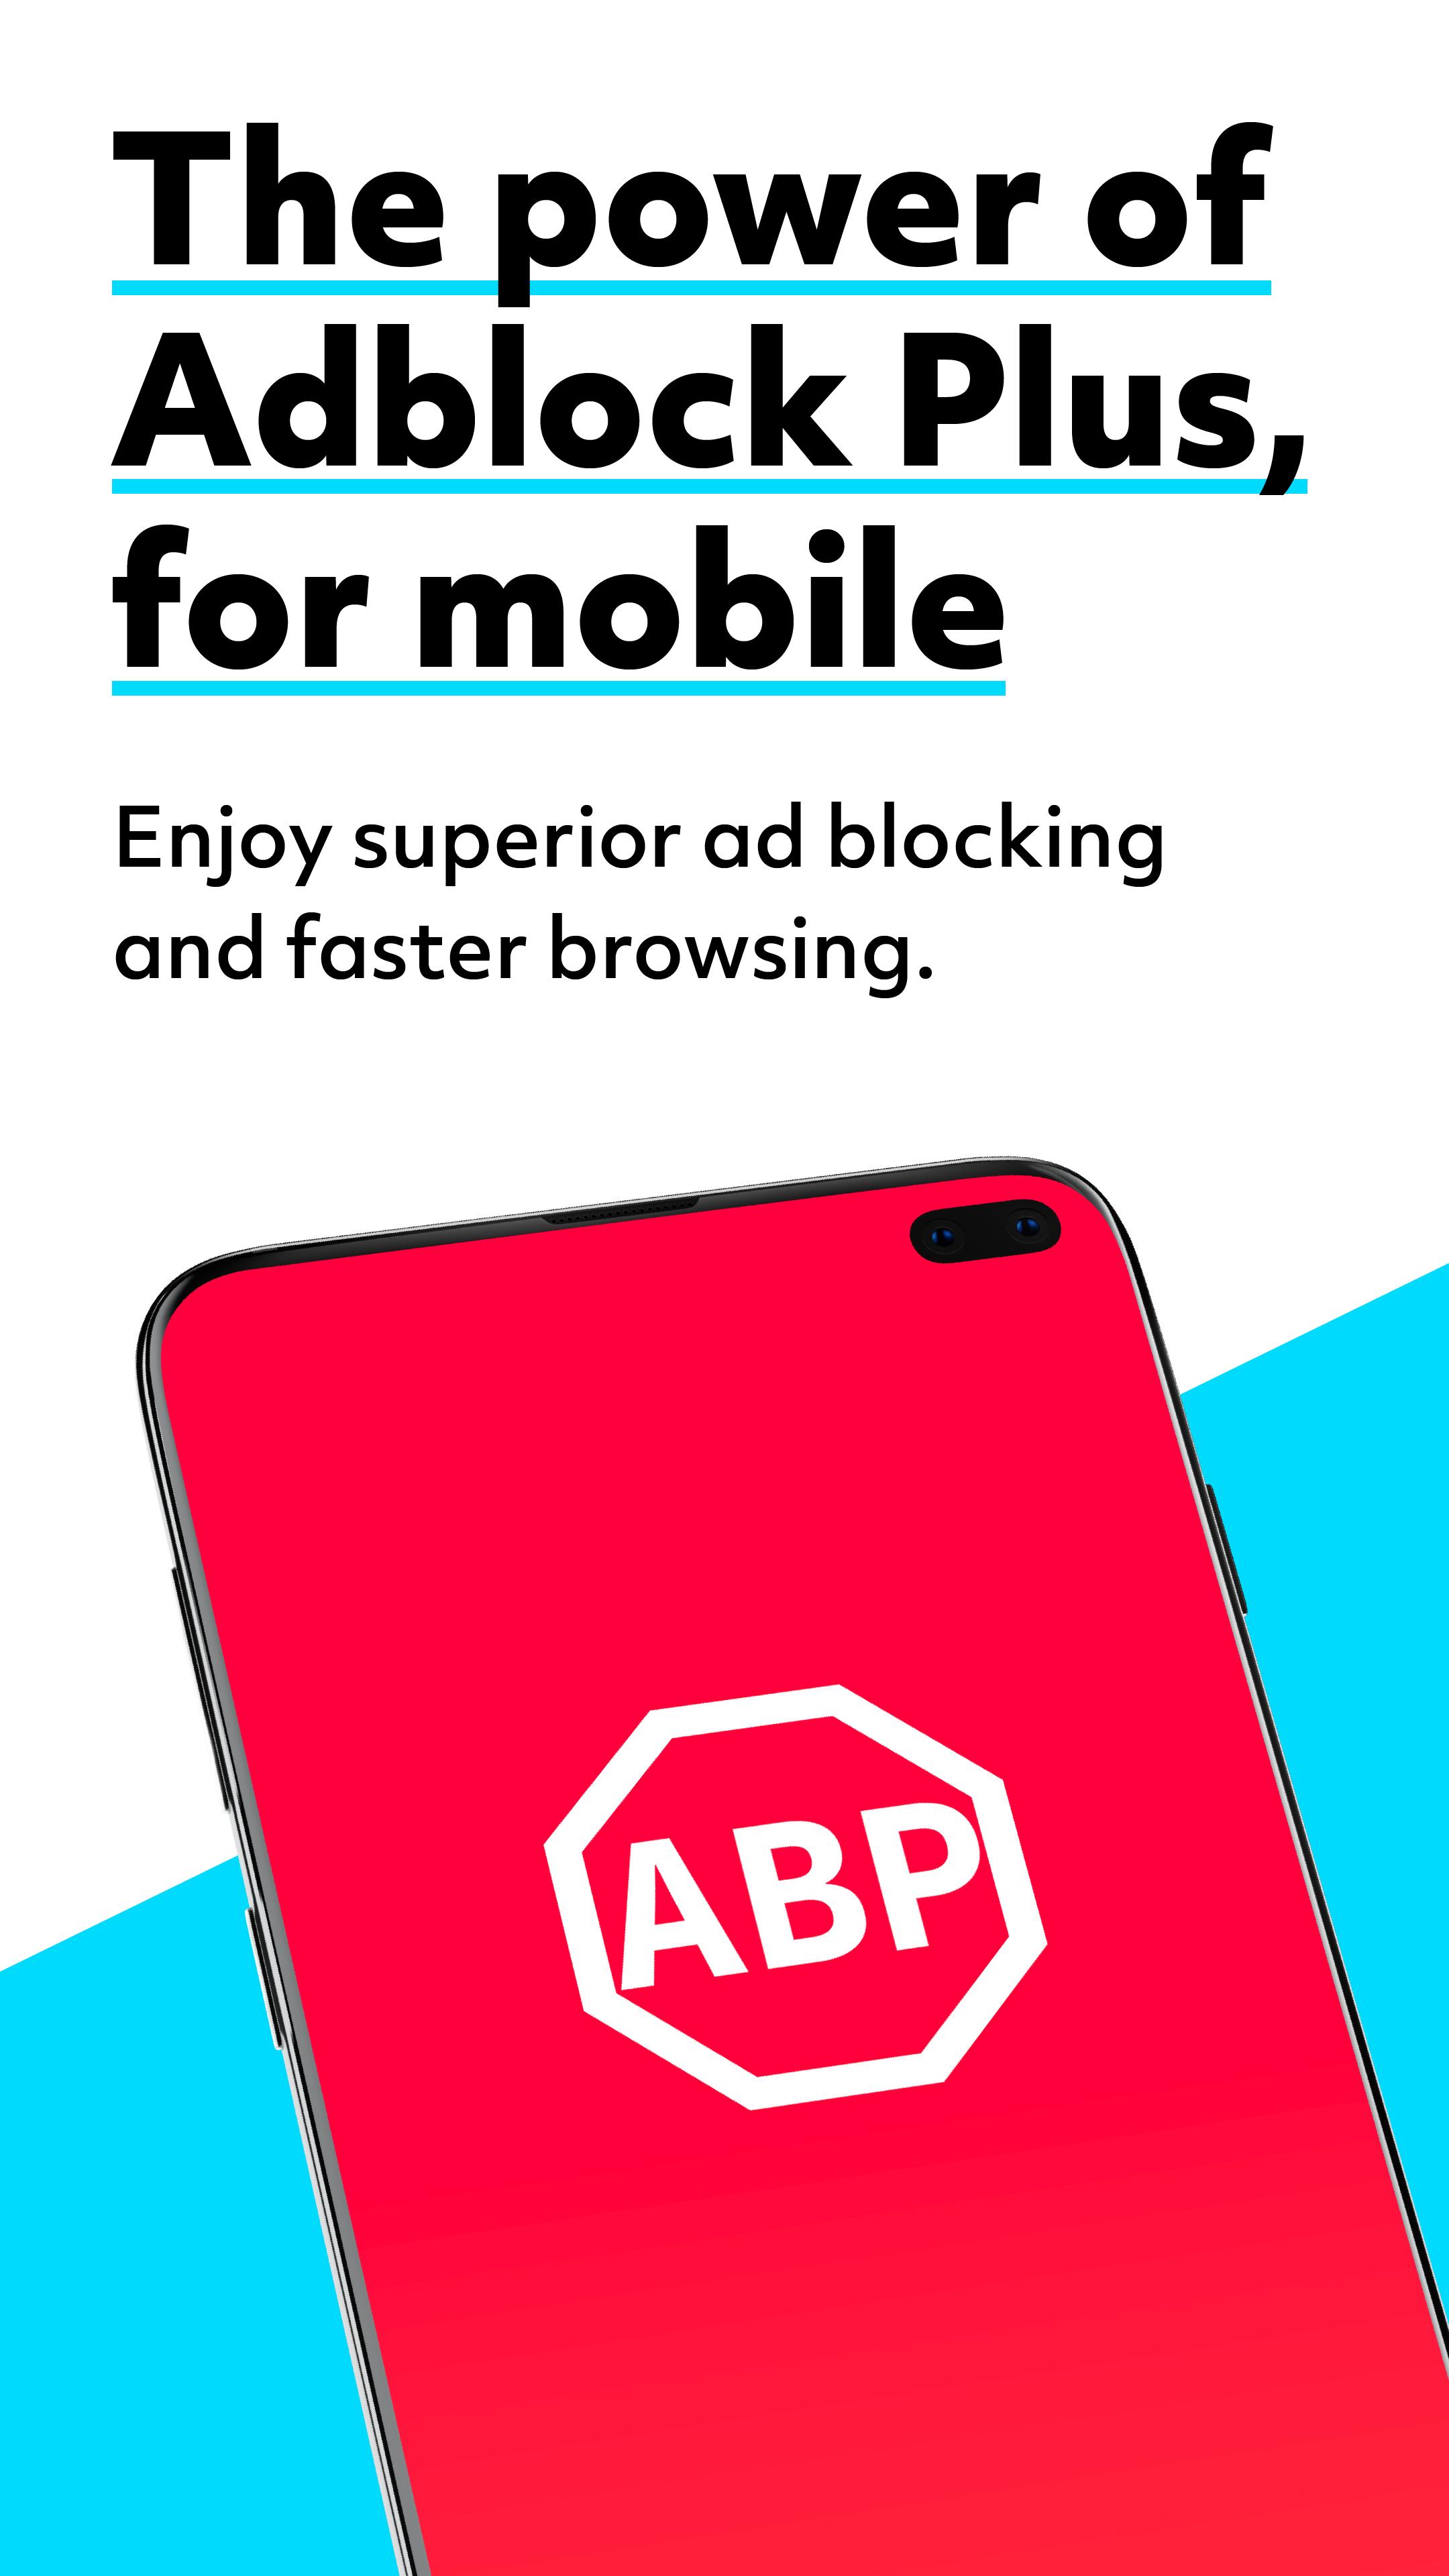 Adblock Browser Beta: Block ads, browse faster